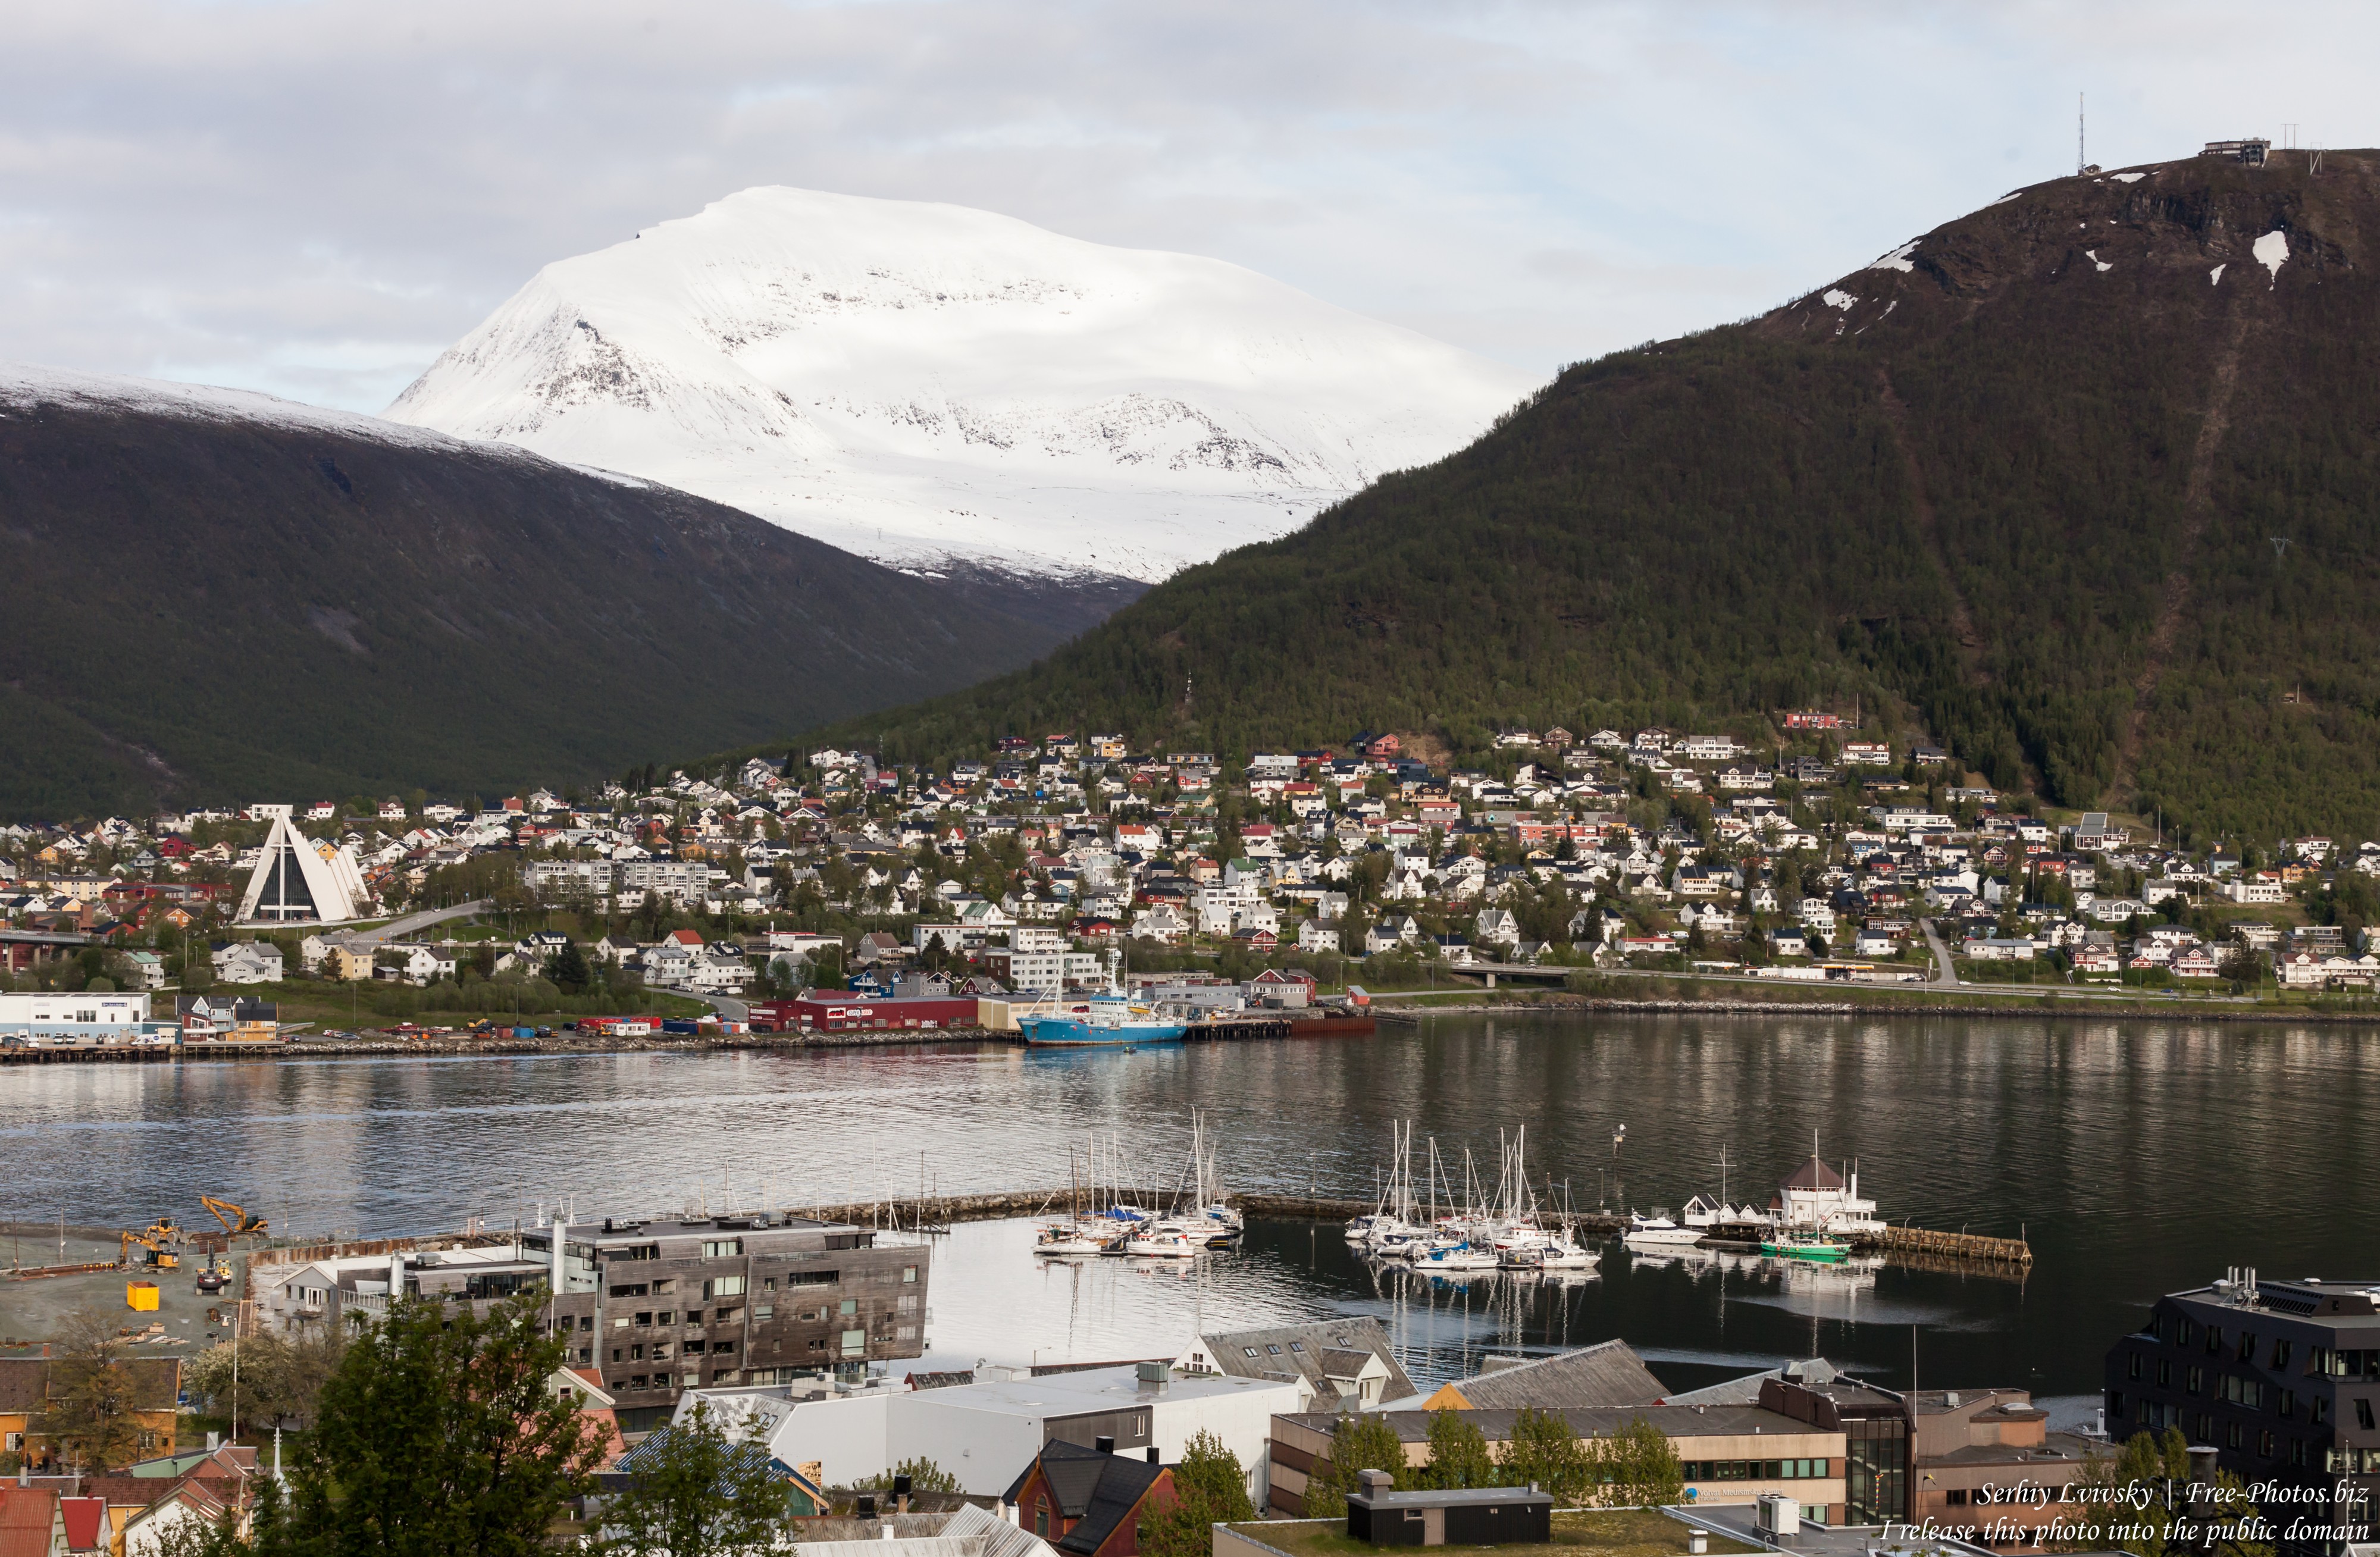 Tromso, Norway, photographed in June 2018 by Serhiy Lvivsky, picture 64